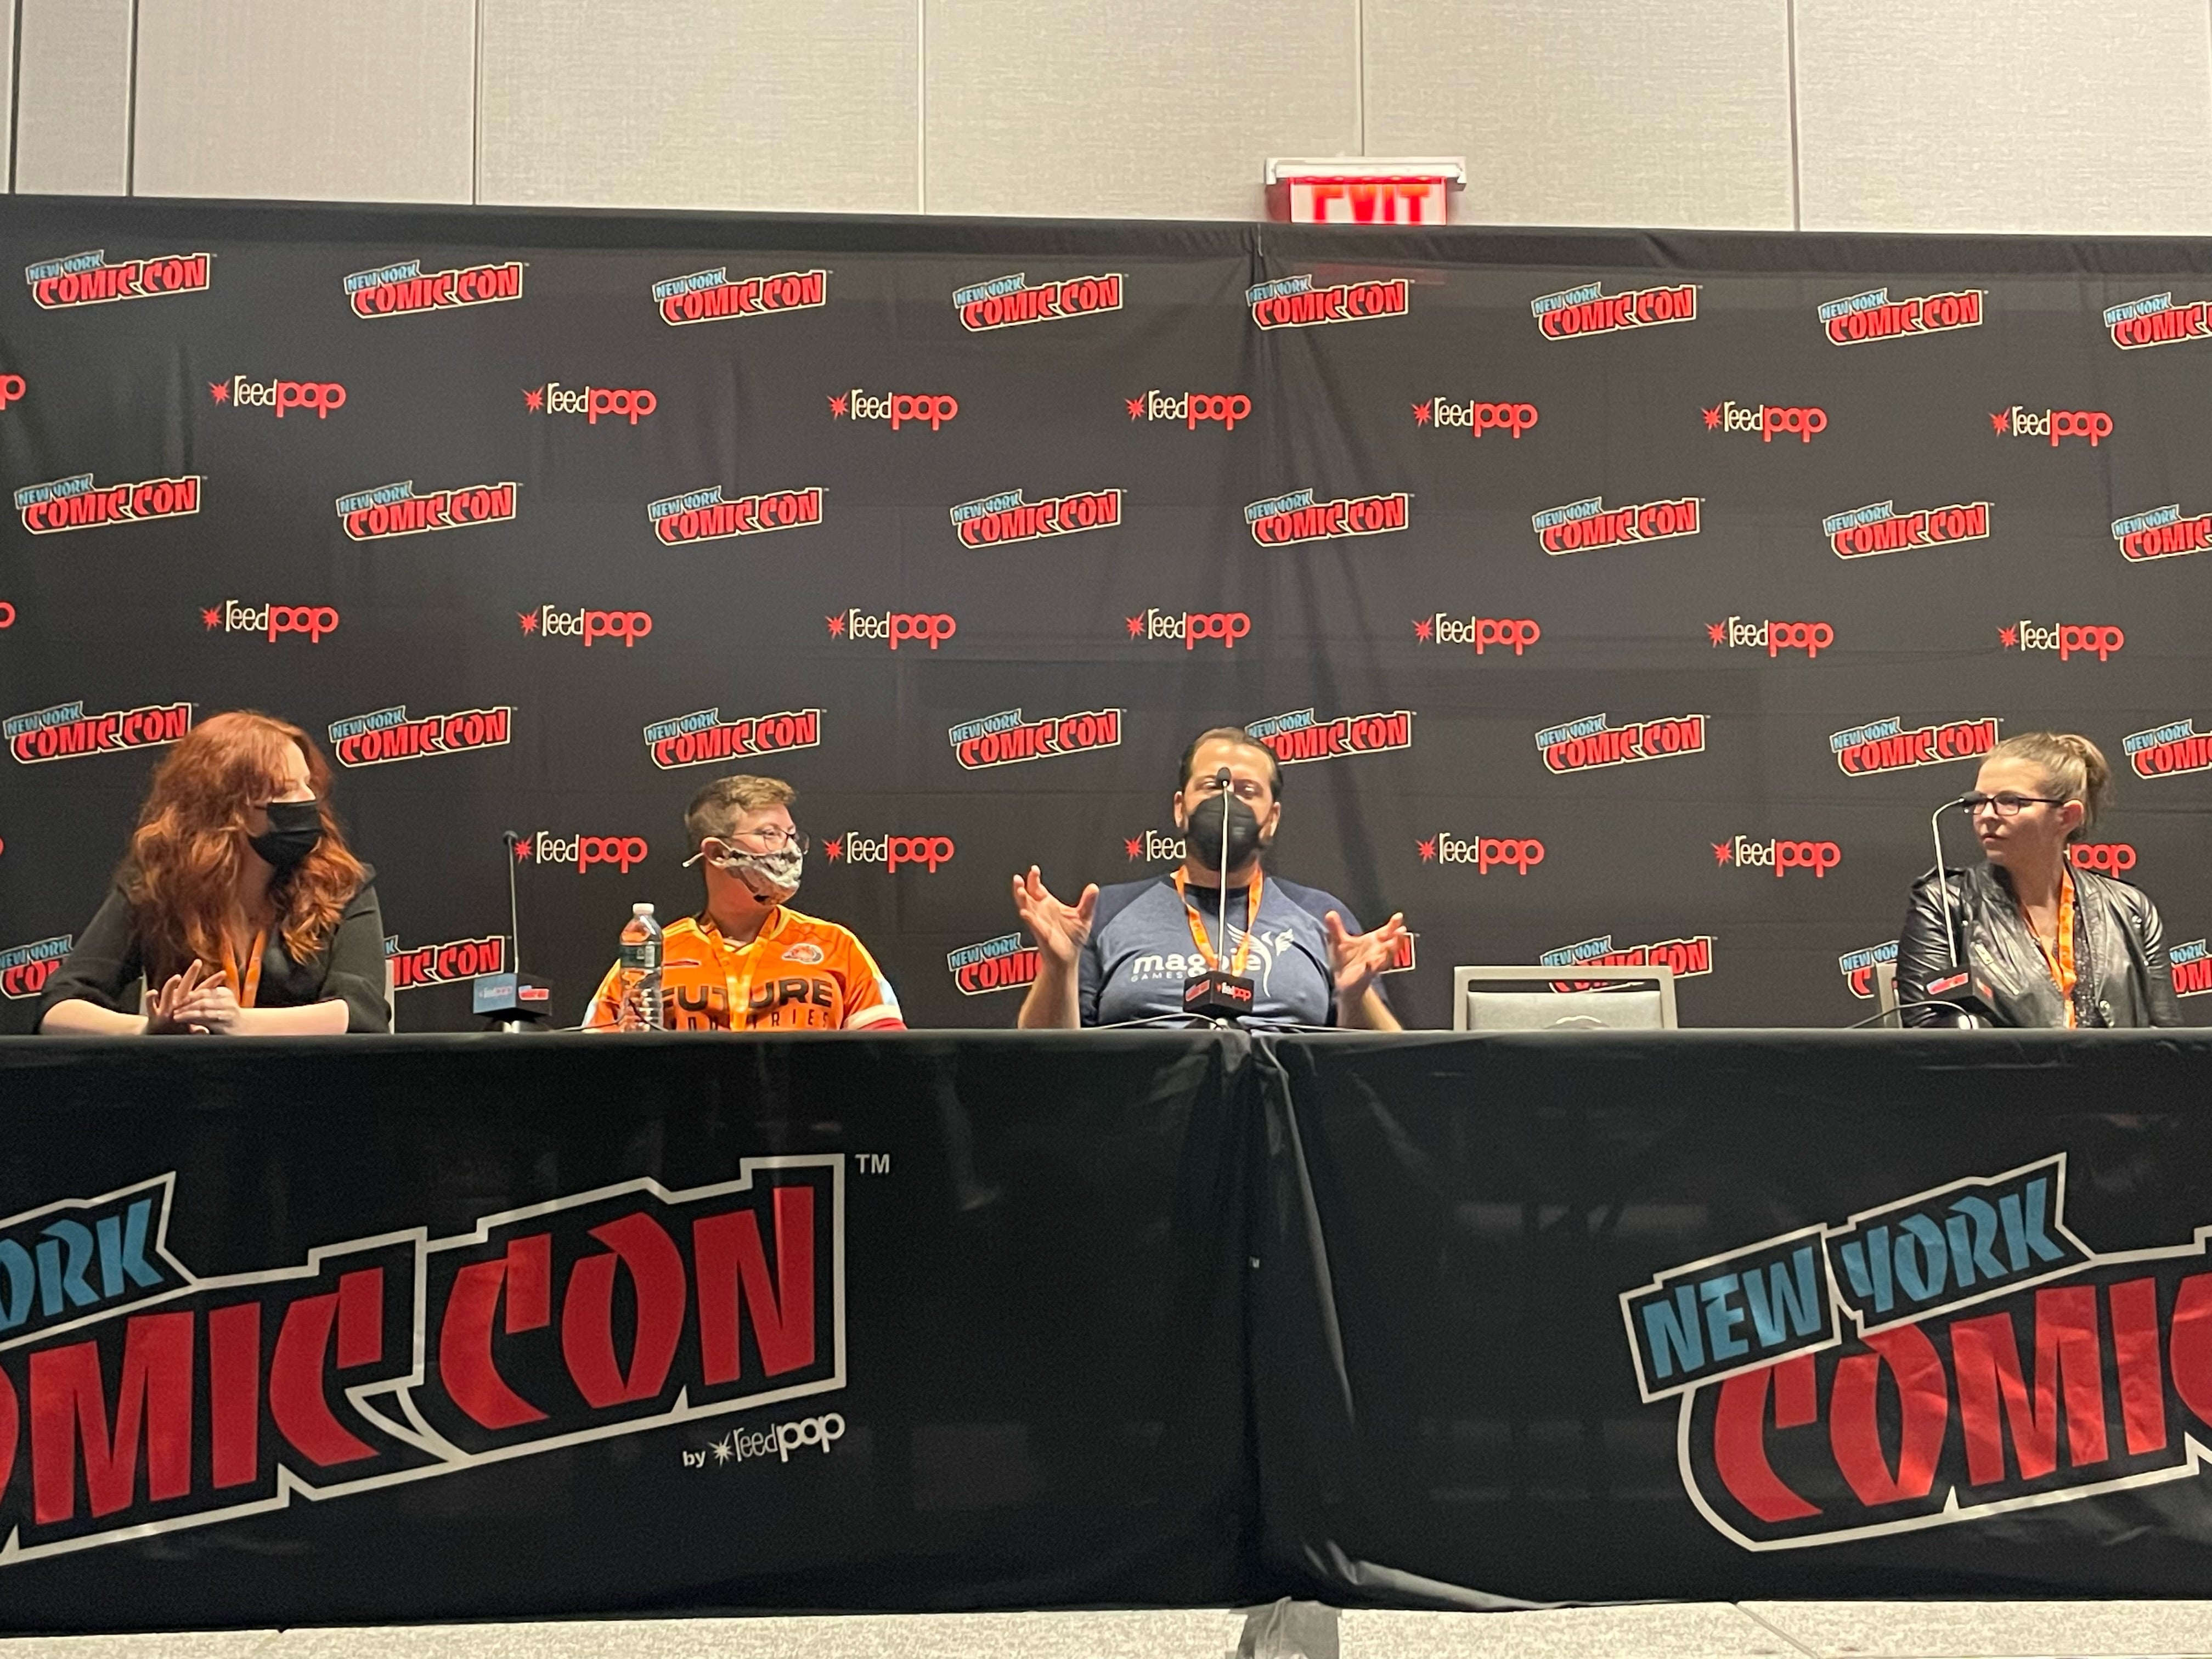 Panelists sitting in front of microphones in front of a NYCC background